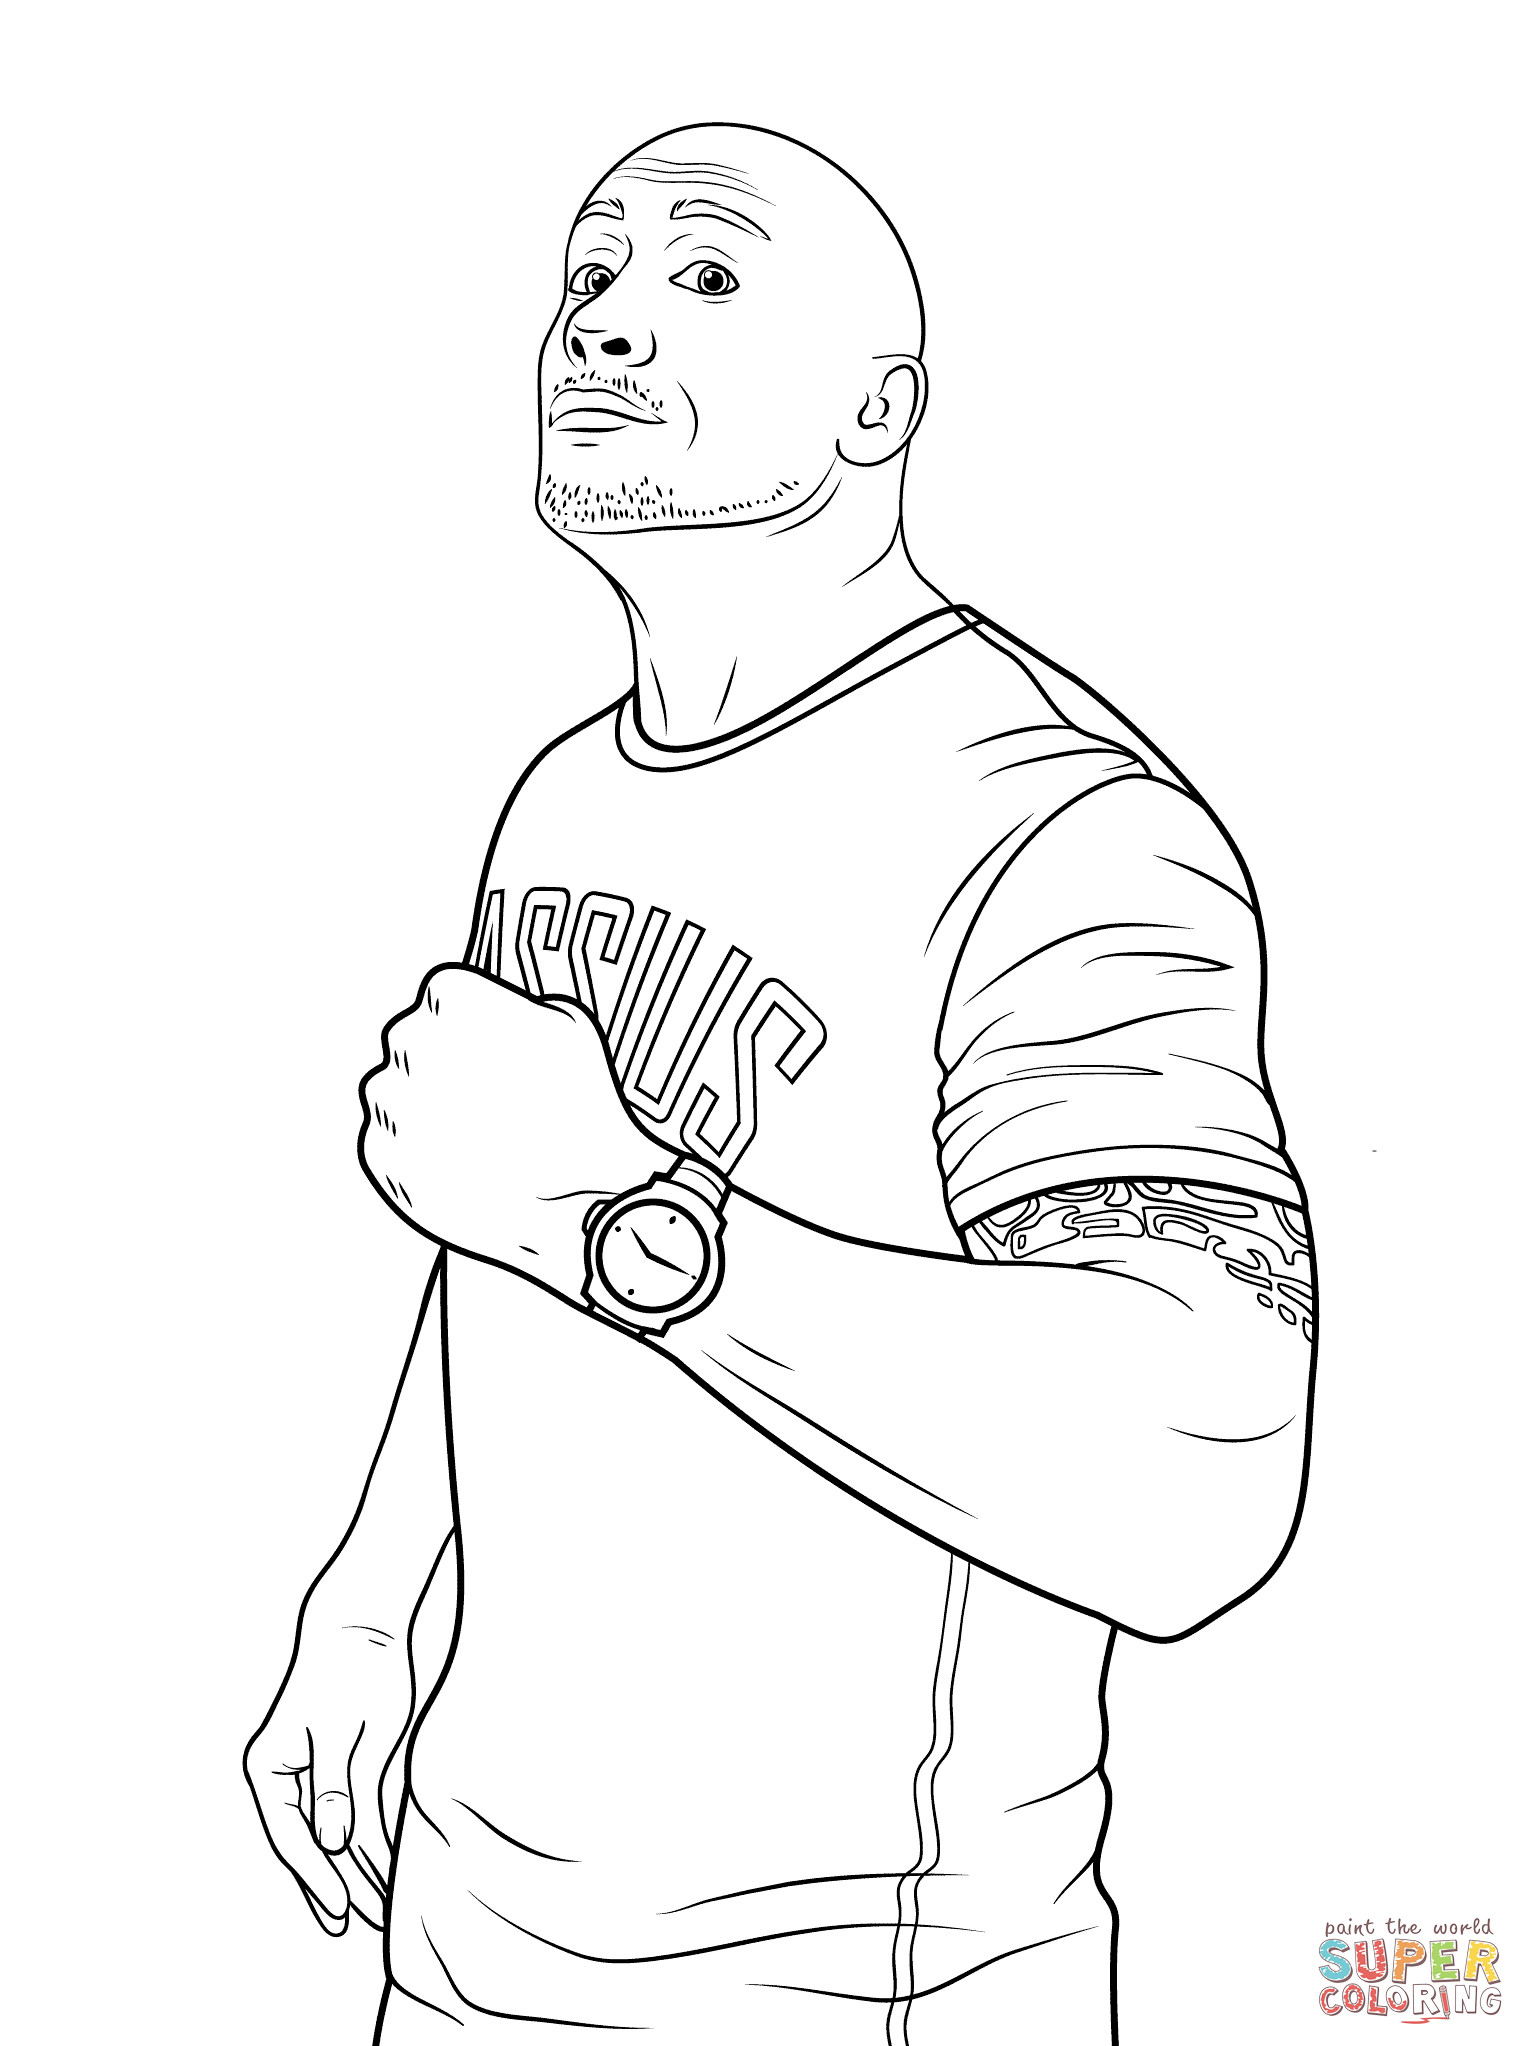 Wwe Coloring Pages For Boys
 WWE clipart color Pencil and in color wwe clipart color